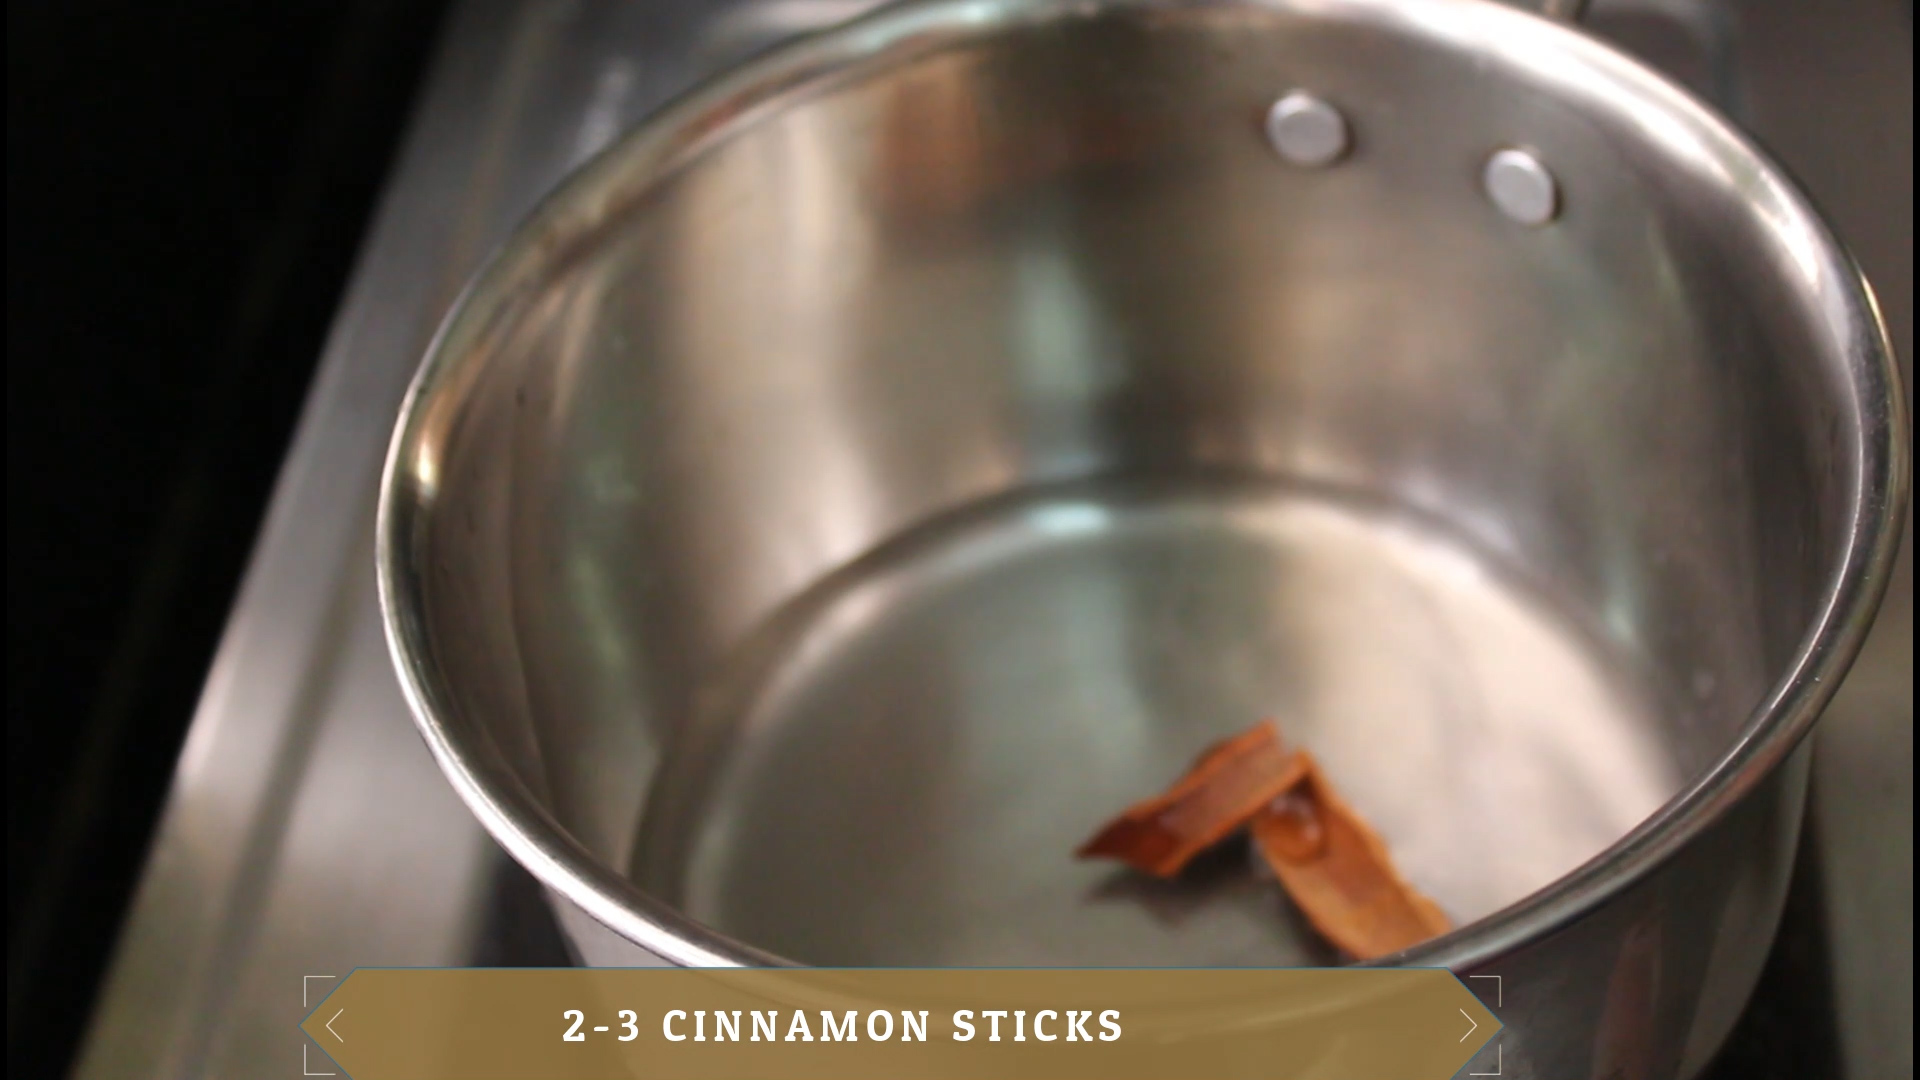 cinnamon sticks added in the water